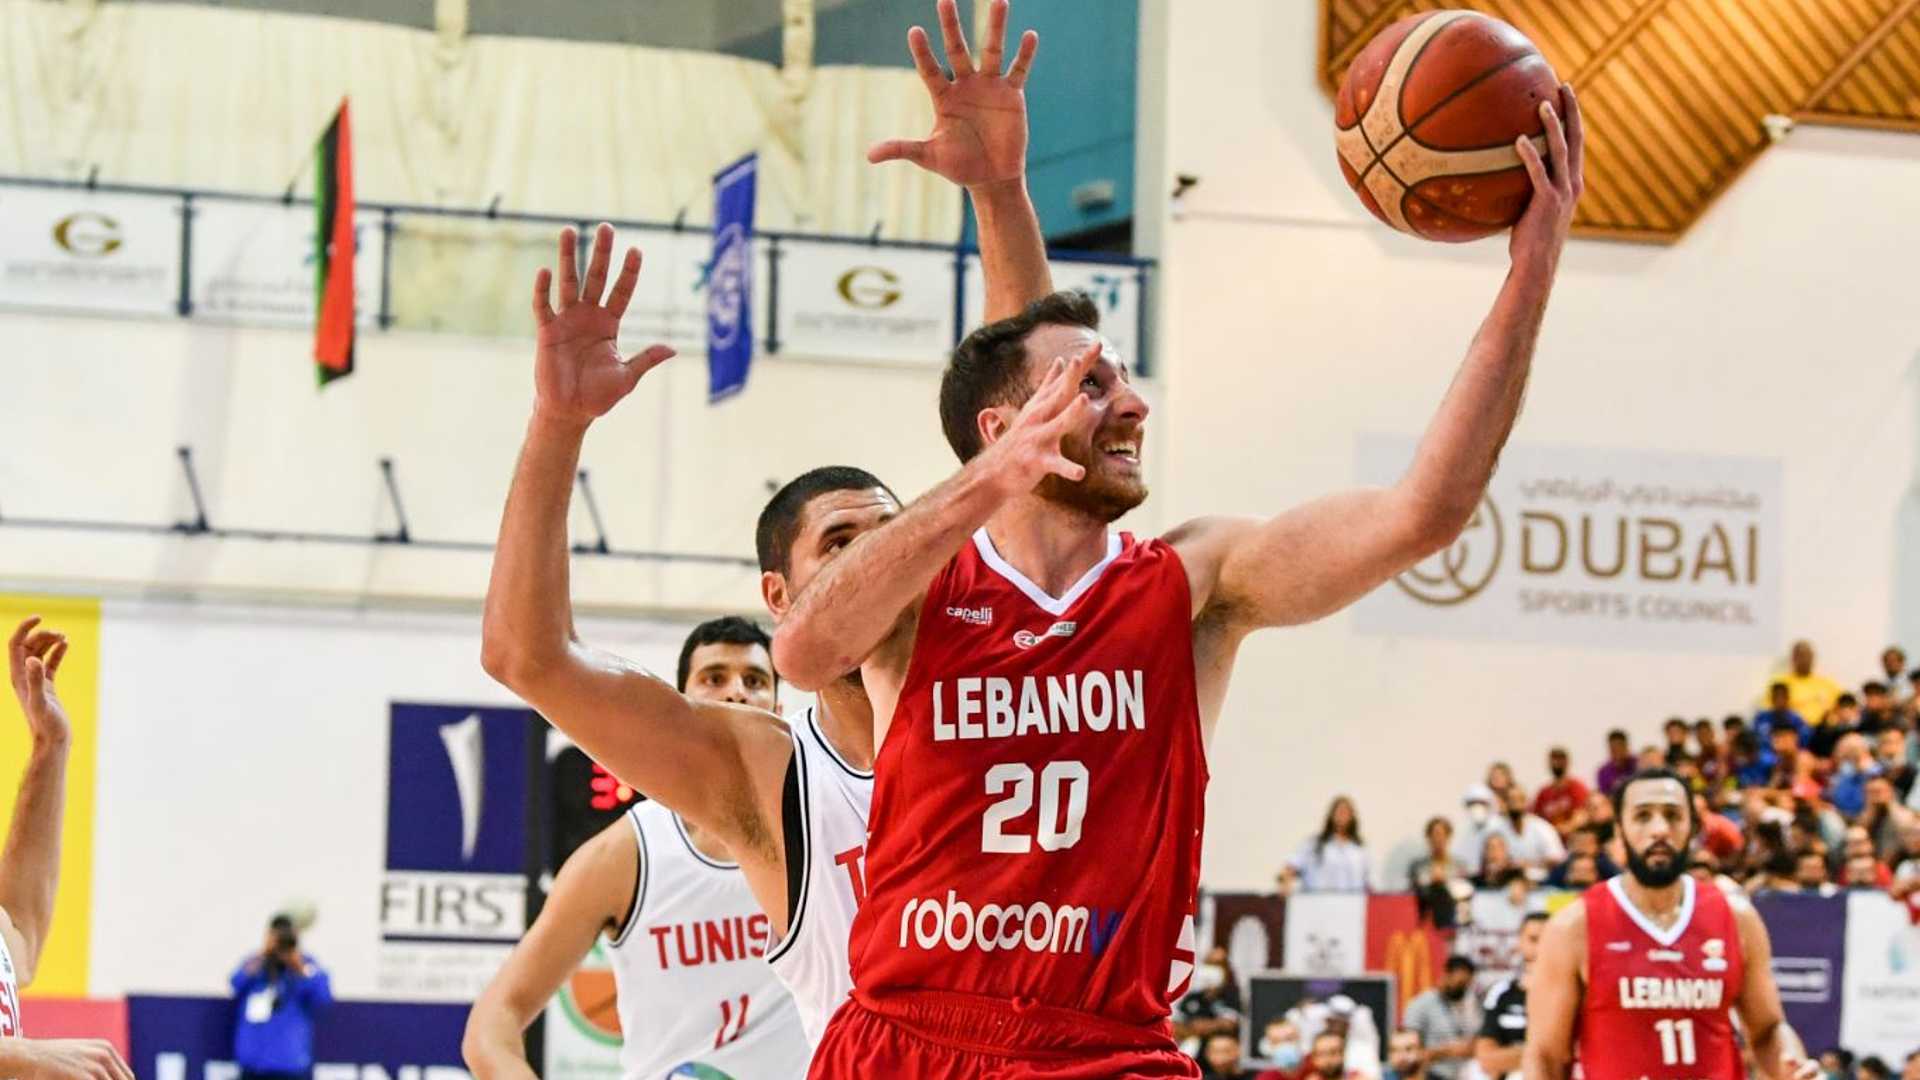 Lebanon vs New Zealand 2023 FIBA Basketball World Cup Qualifiers Live Stream, Schedule, Fixture, and Probable Lineups, Form Guide, Head to Head, November 10, 2022